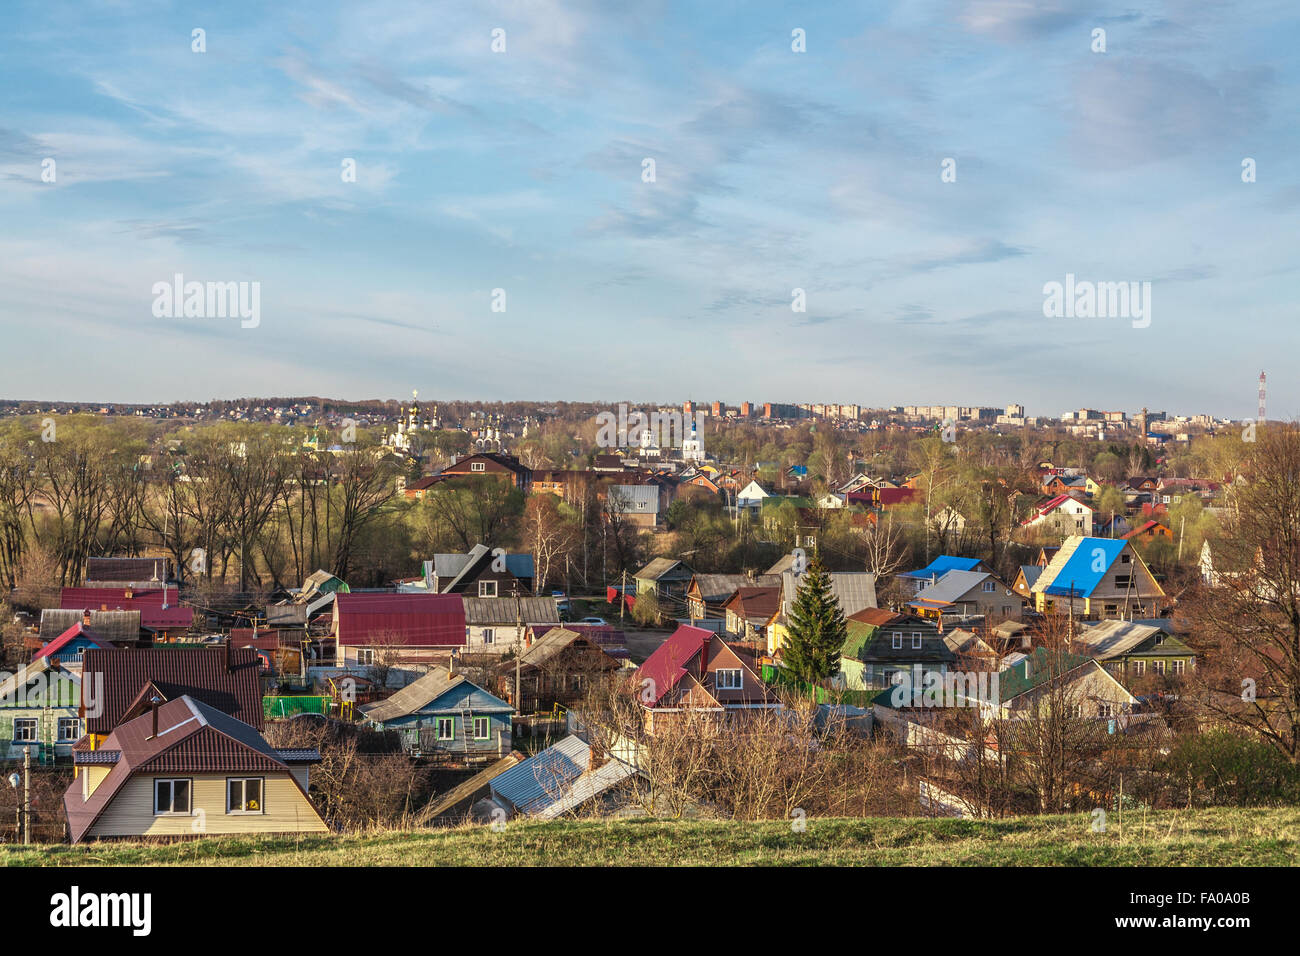 Pereslavl-Zalessky, Russia - April 30, 2015: The city is founded in 1152 by the prince Yury Dolgorukiy. View of the modern city Stock Photo